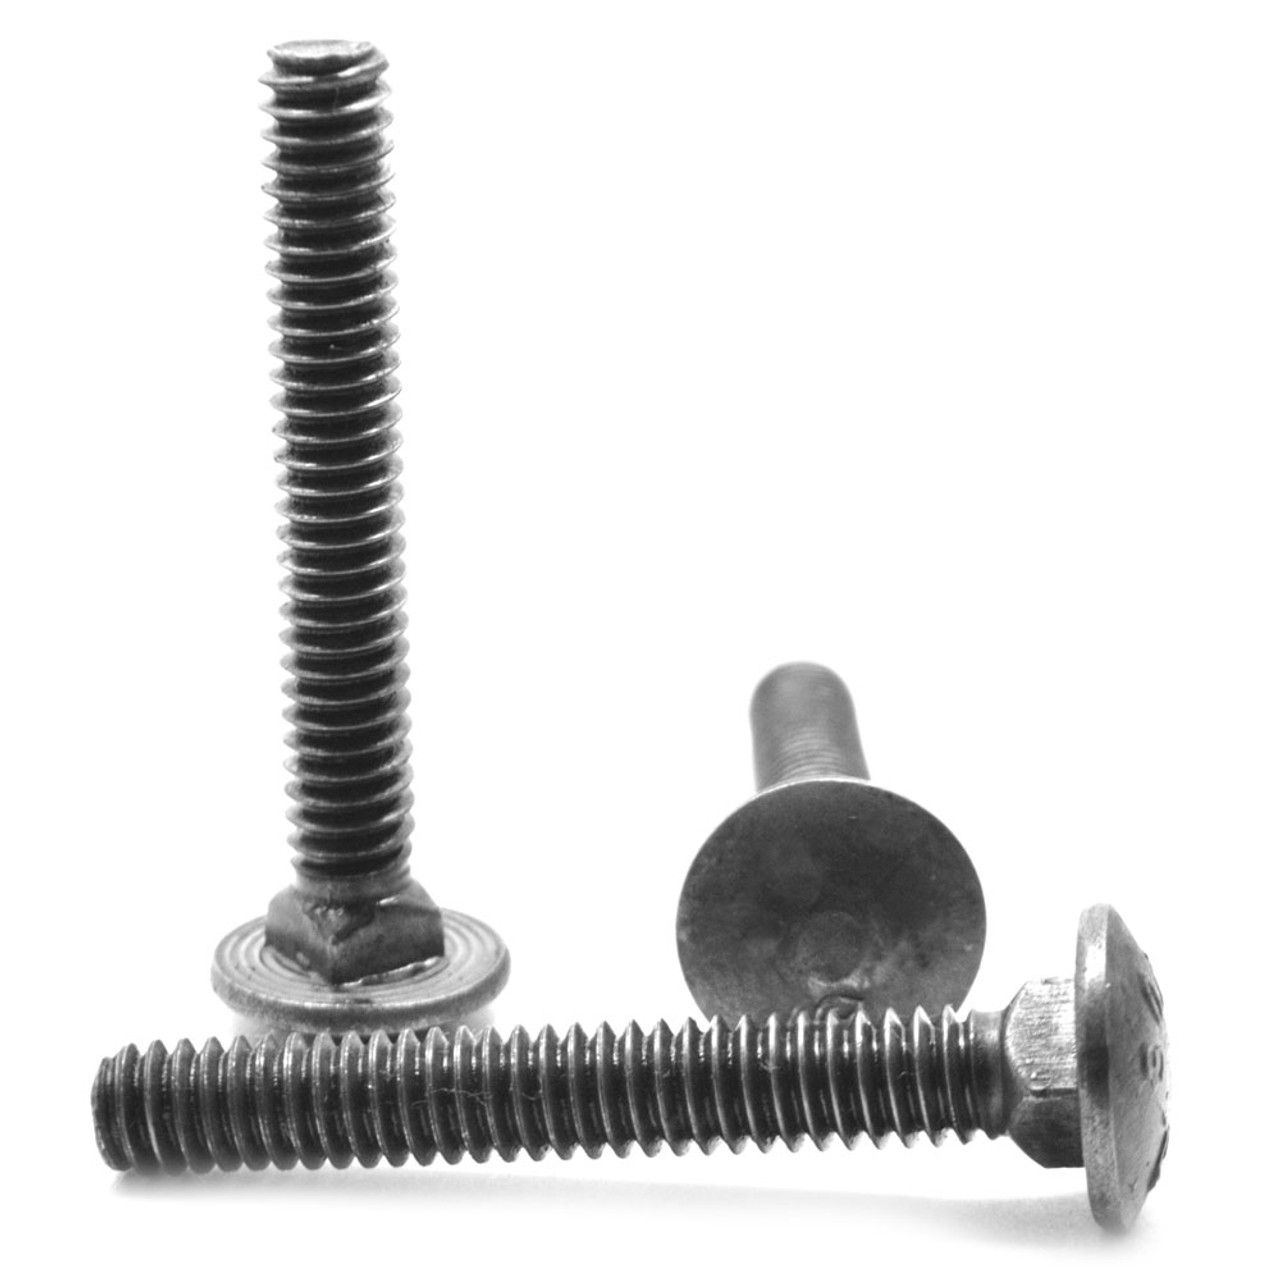 5/16"-18 x 1" (FT) Coarse Thread A307 Grade A Carriage Bolt Low Carbon Steel Plain Finish